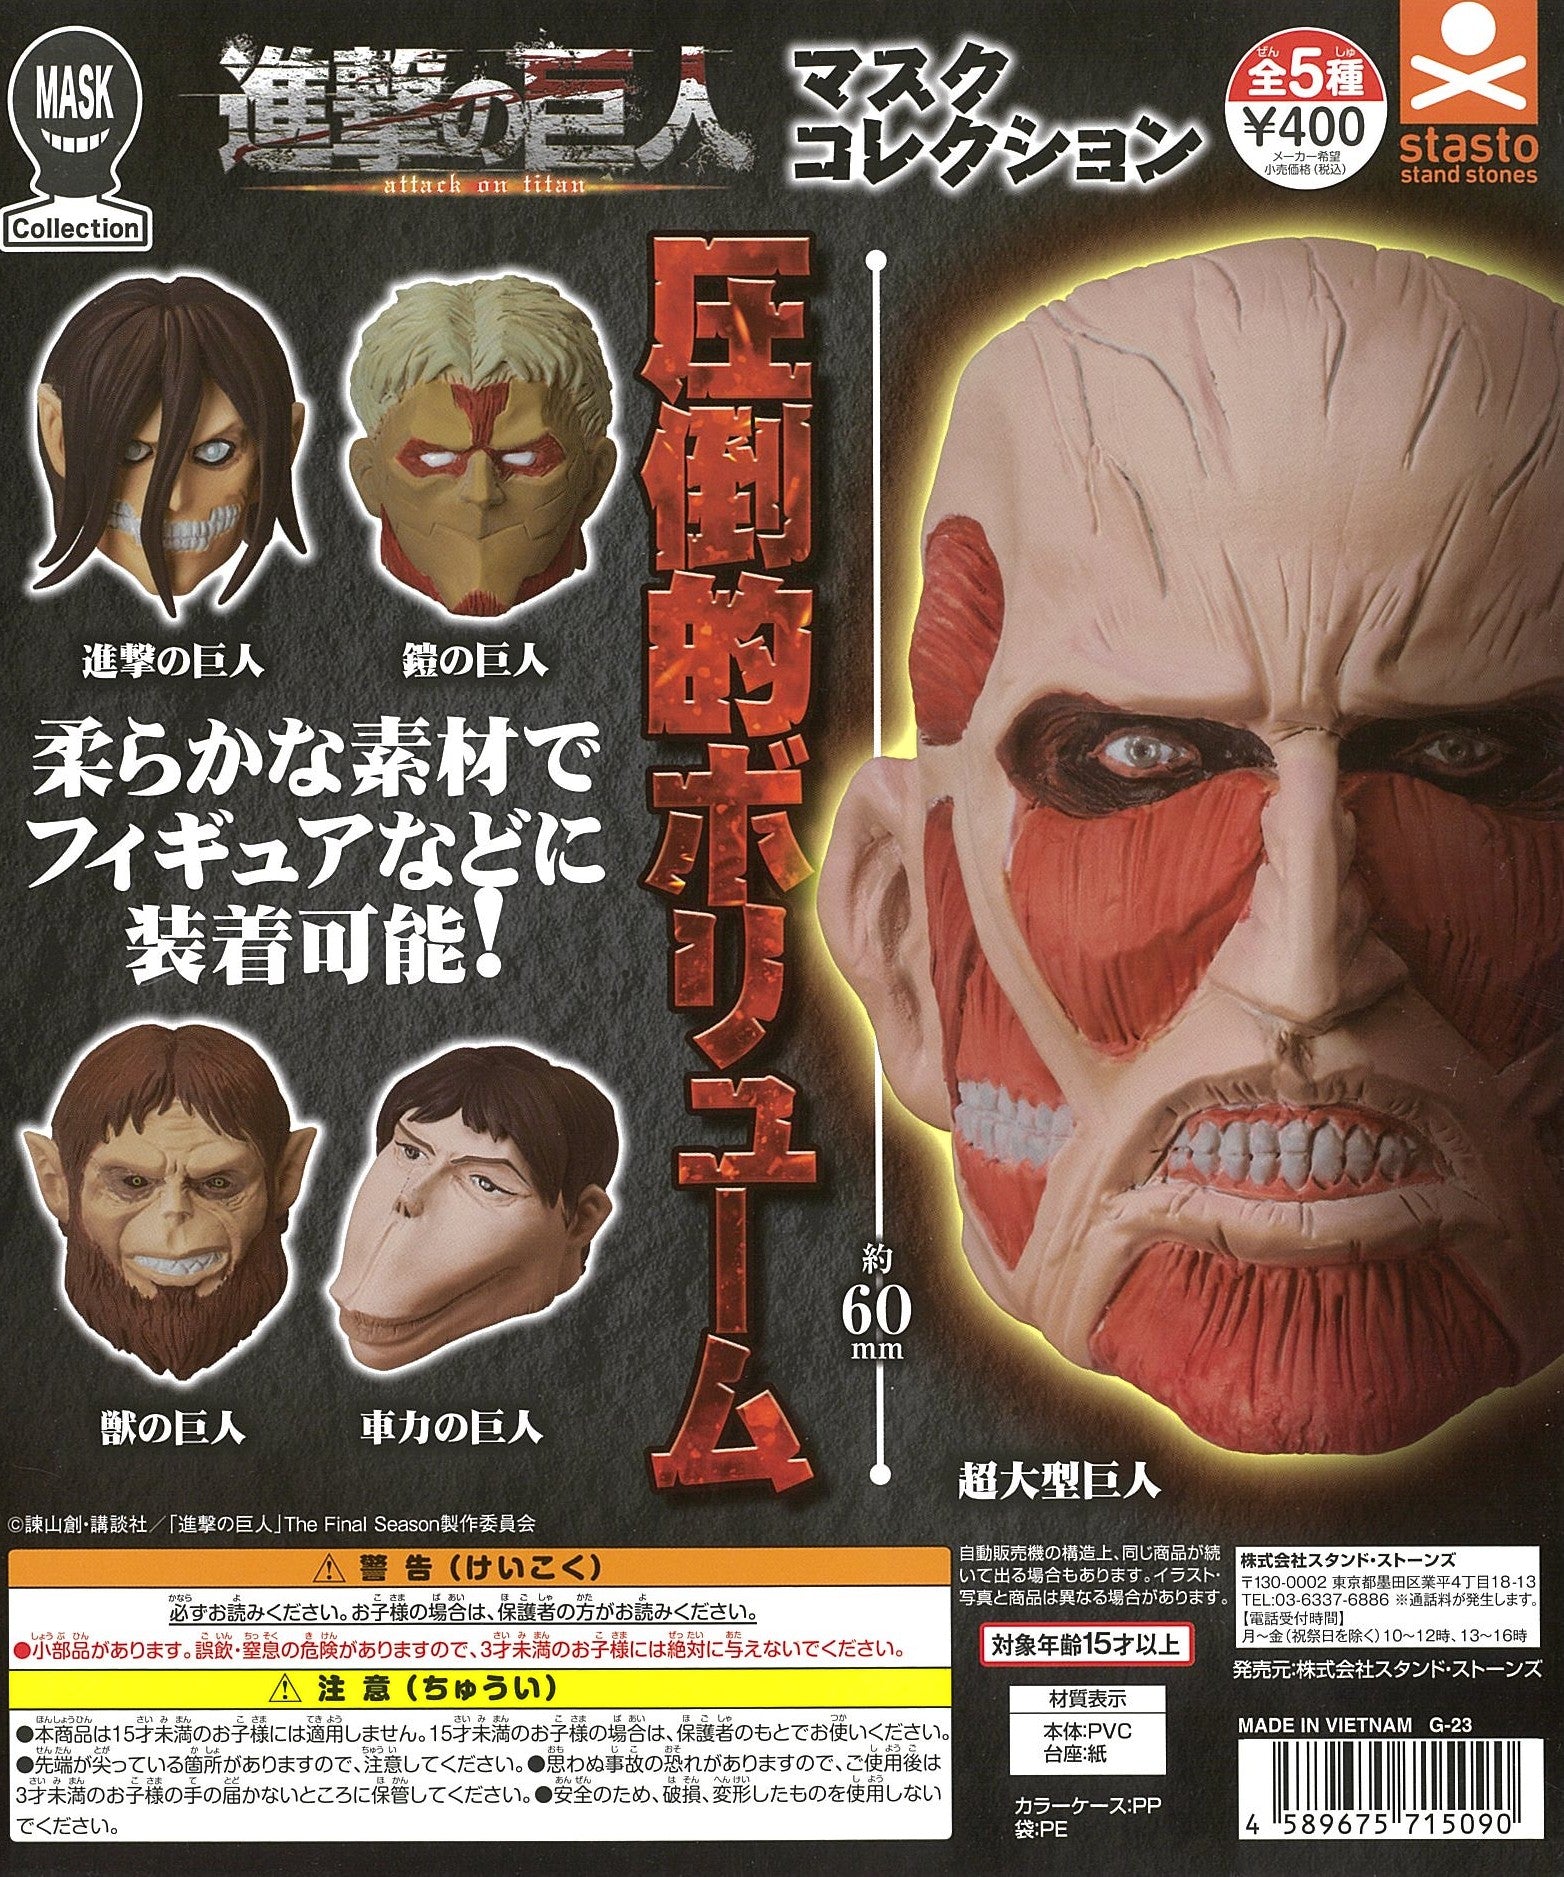 CP2515 Attack on Titan Mask Collection